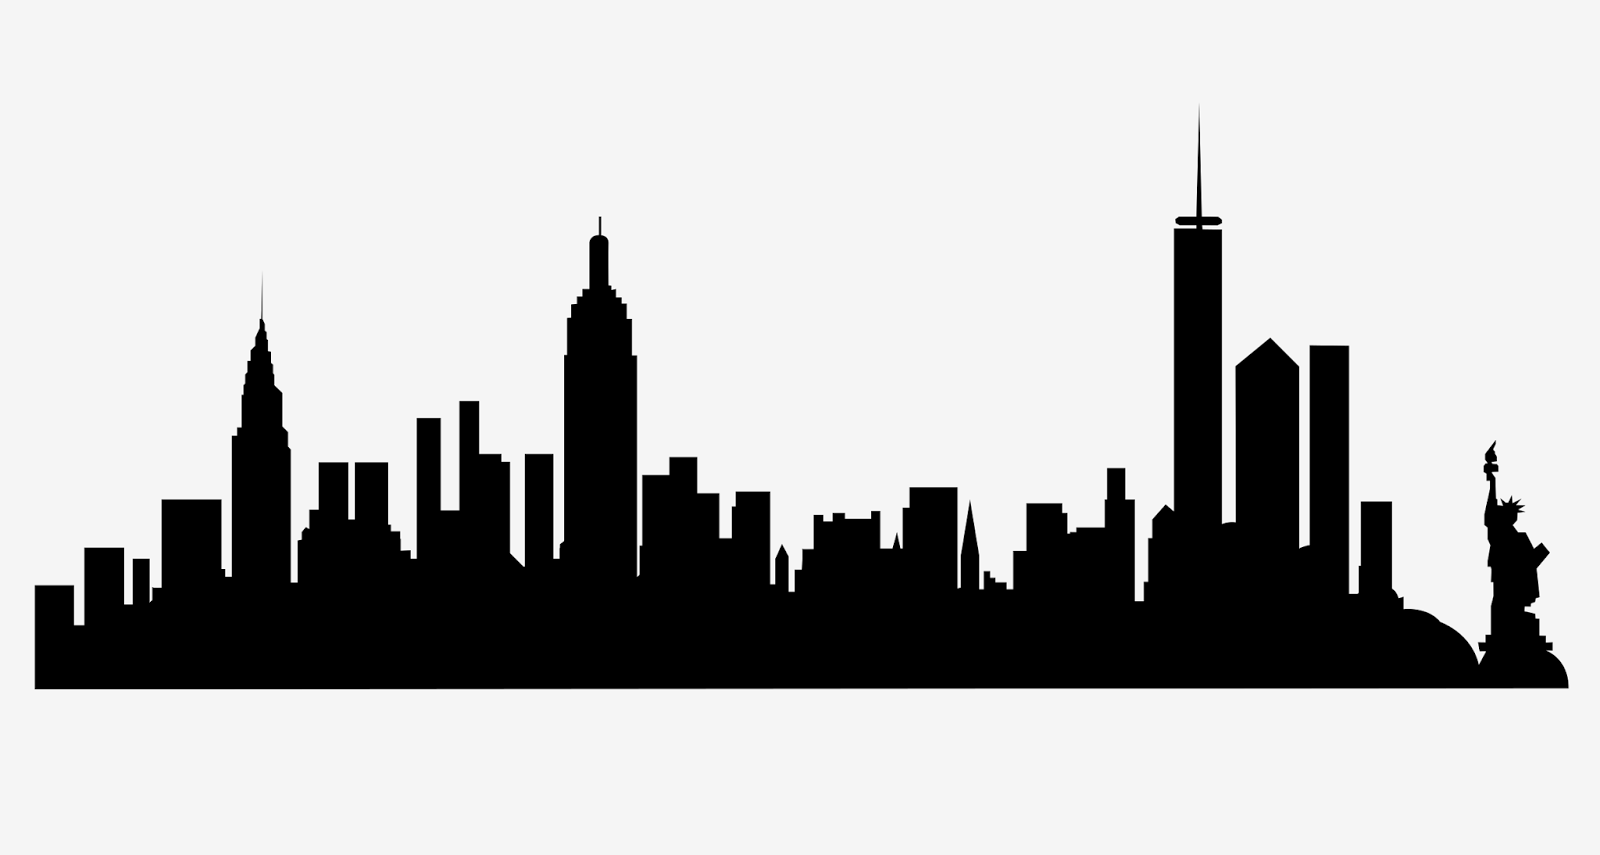 City Silhouette Png